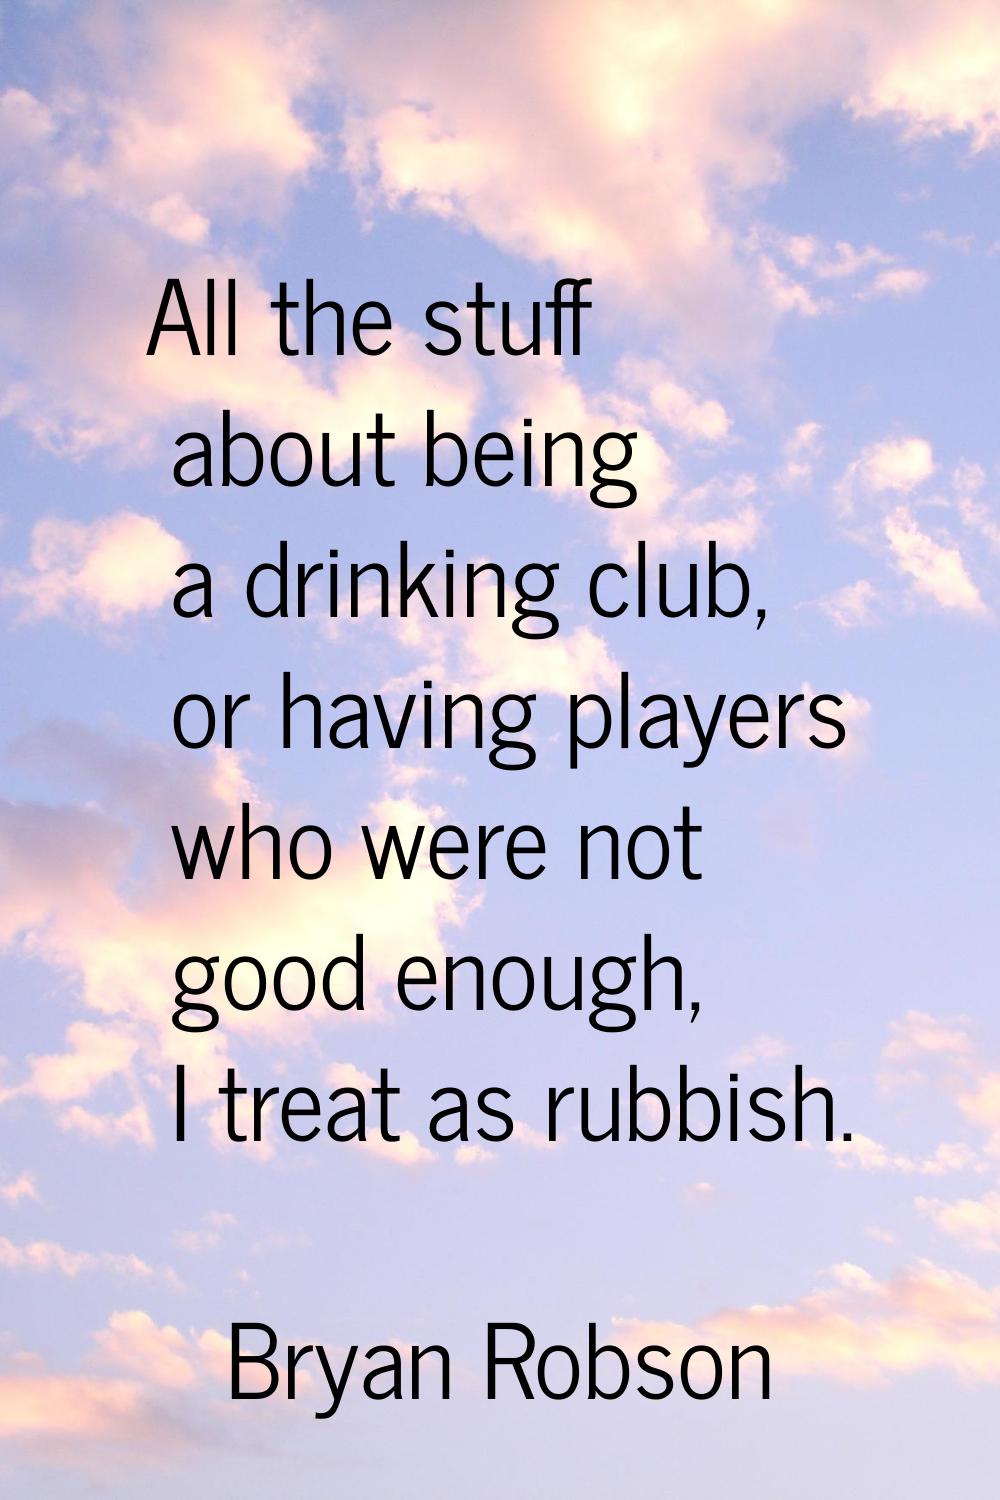 All the stuff about being a drinking club, or having players who were not good enough, I treat as r